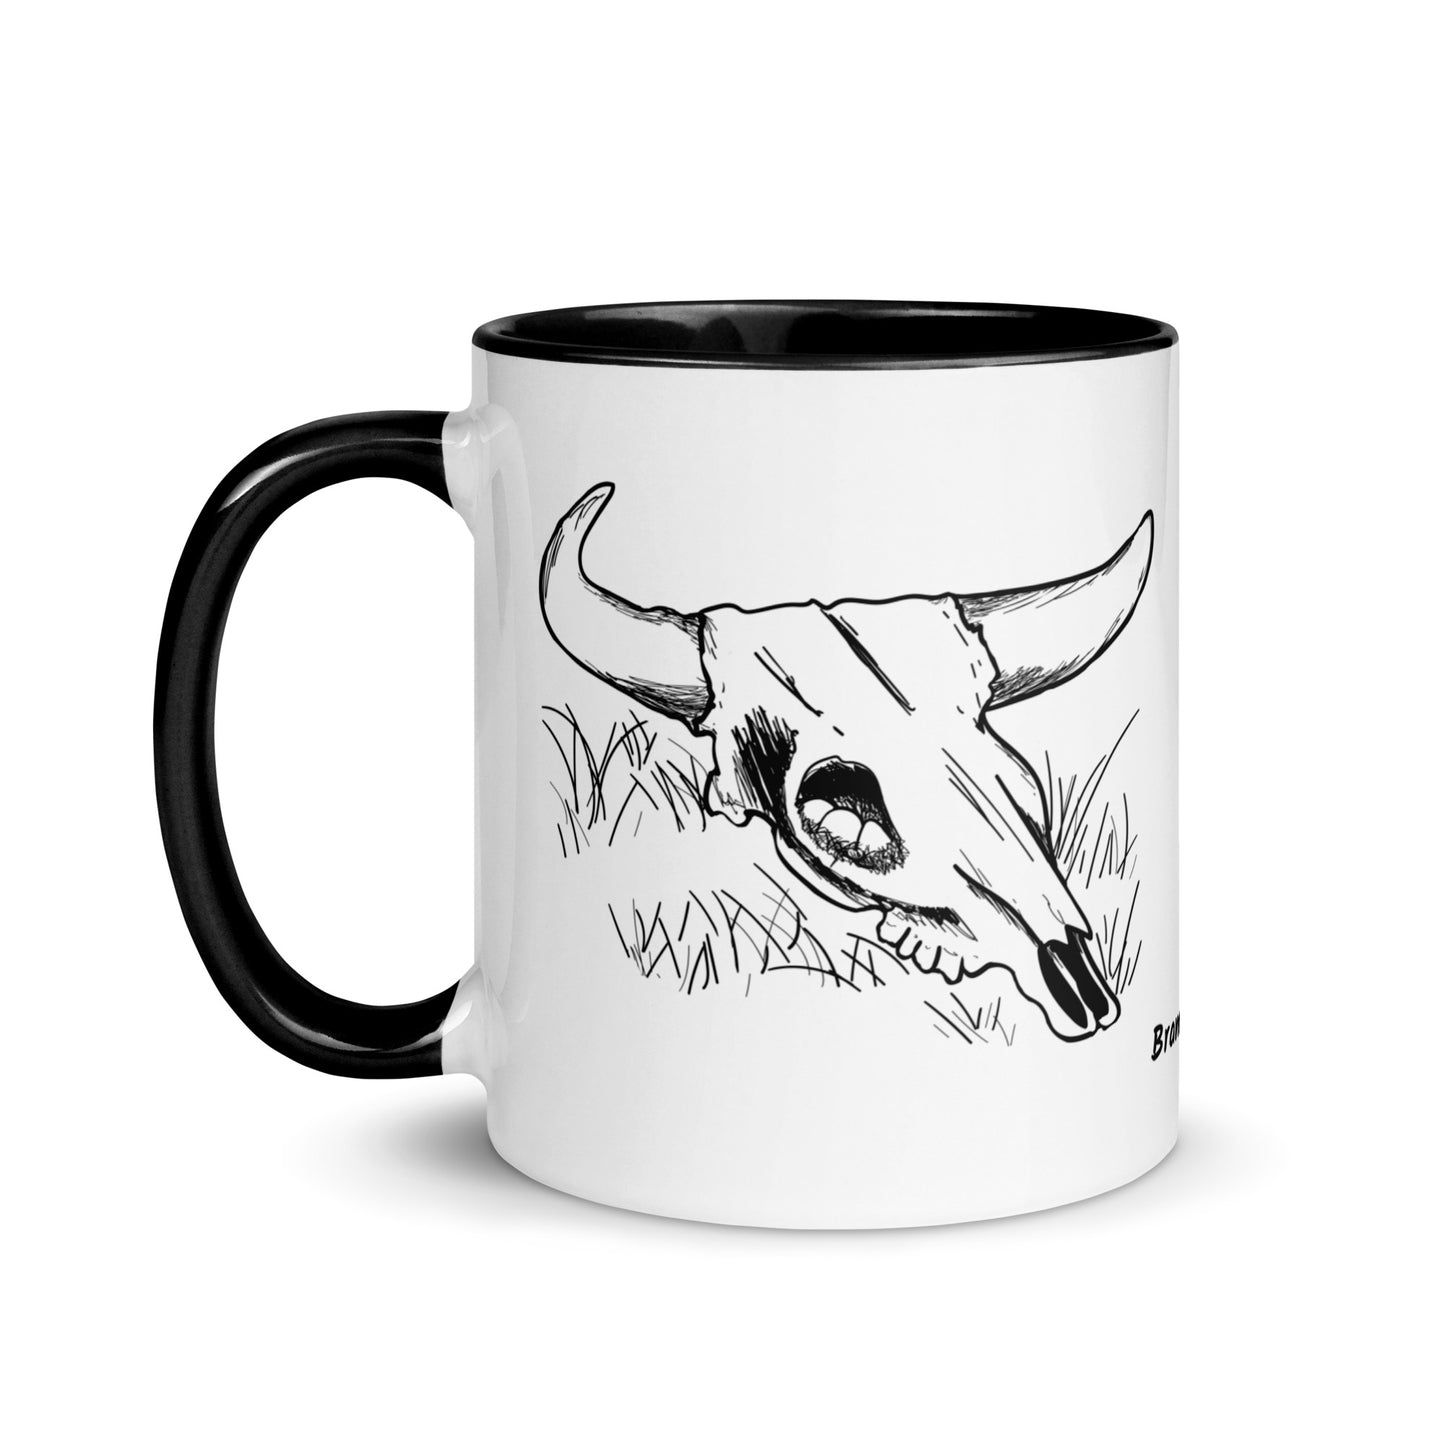 11 ounce ceramic mug. White with black handle and inside. Features double sided image of a cow skull cradling a bird nest.